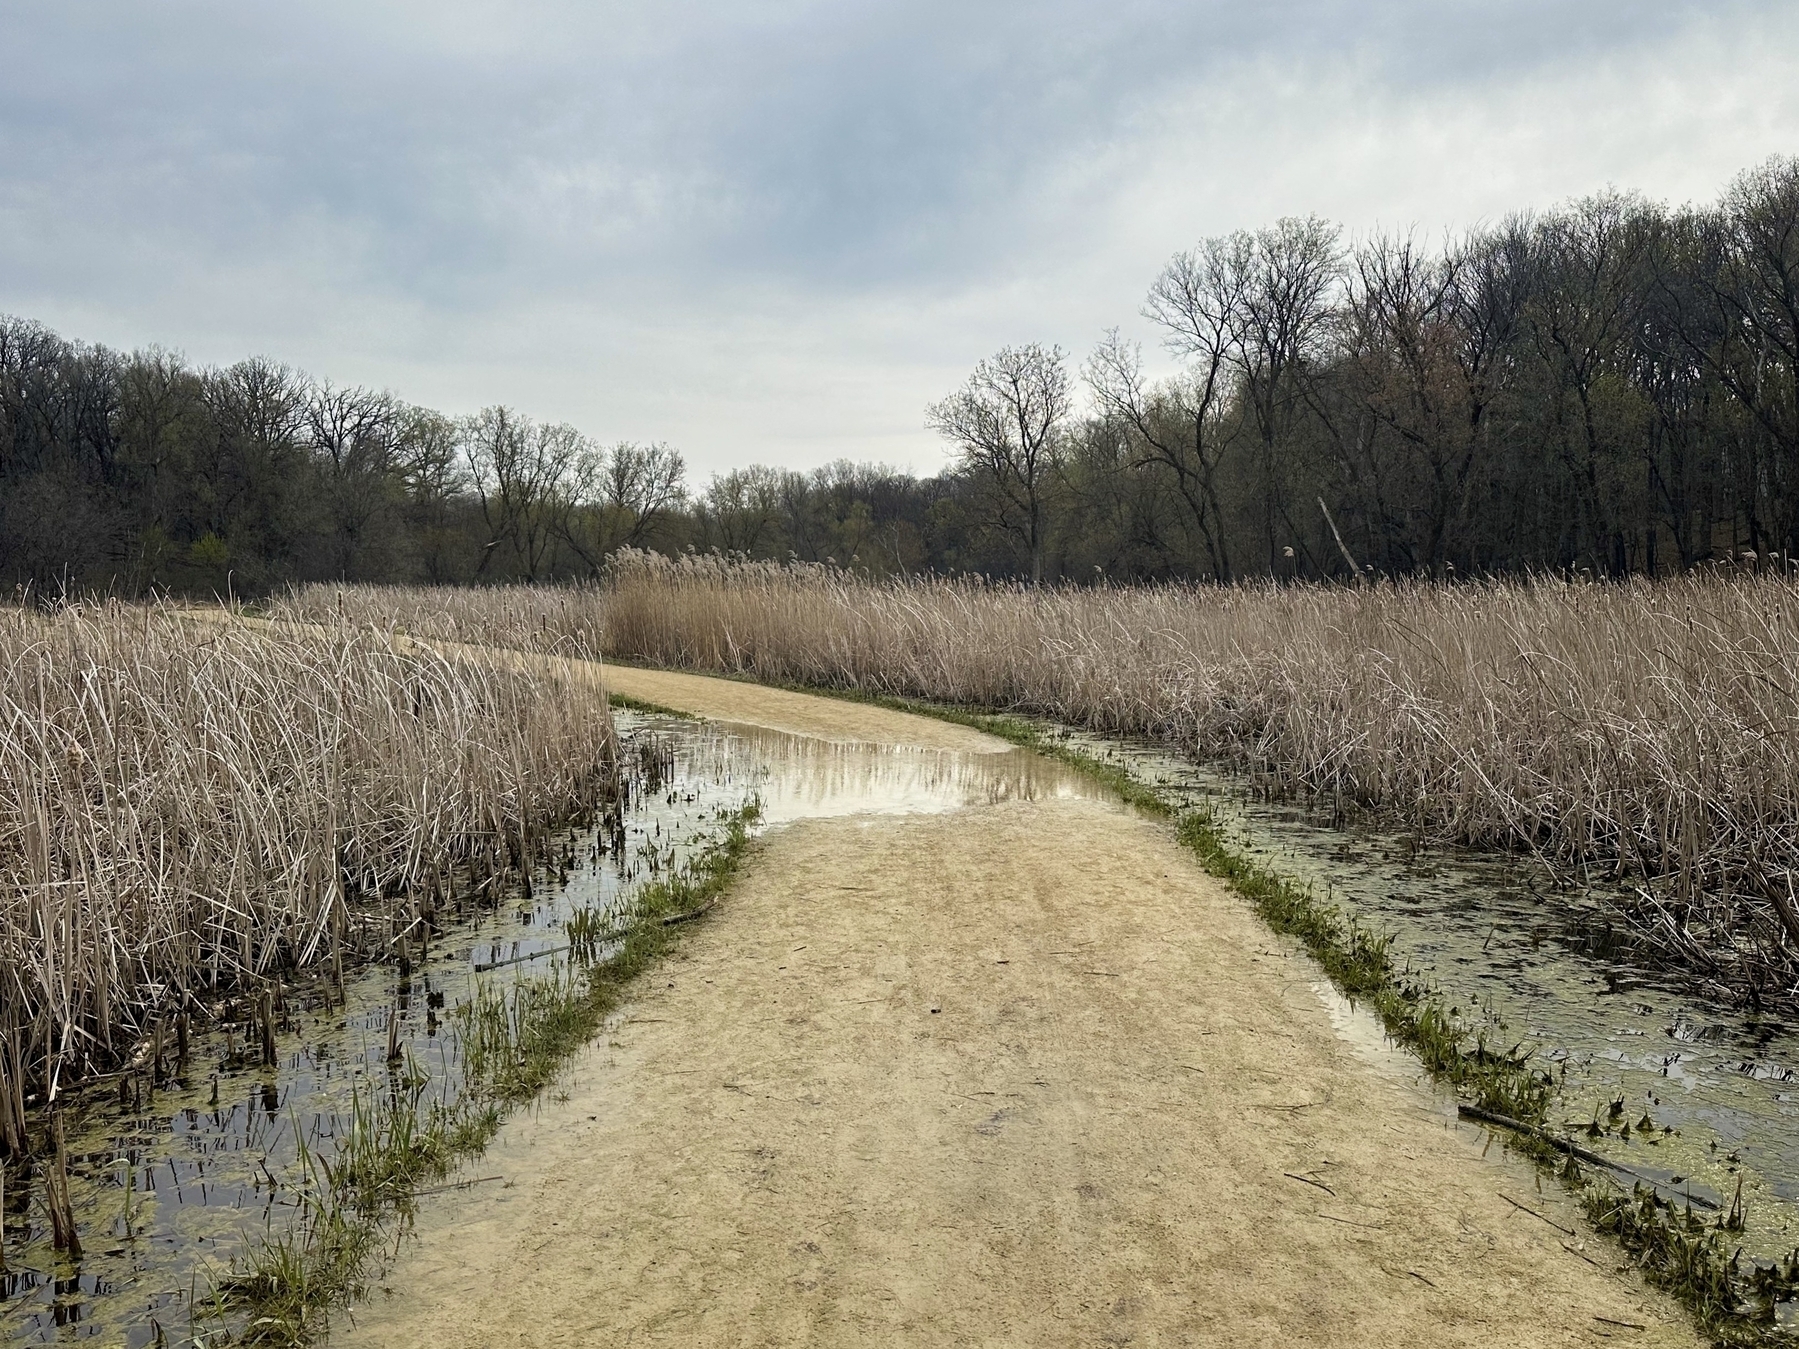 A dirt path cuts through wetland with tall, dry reeds on either side, under an overcast sky.